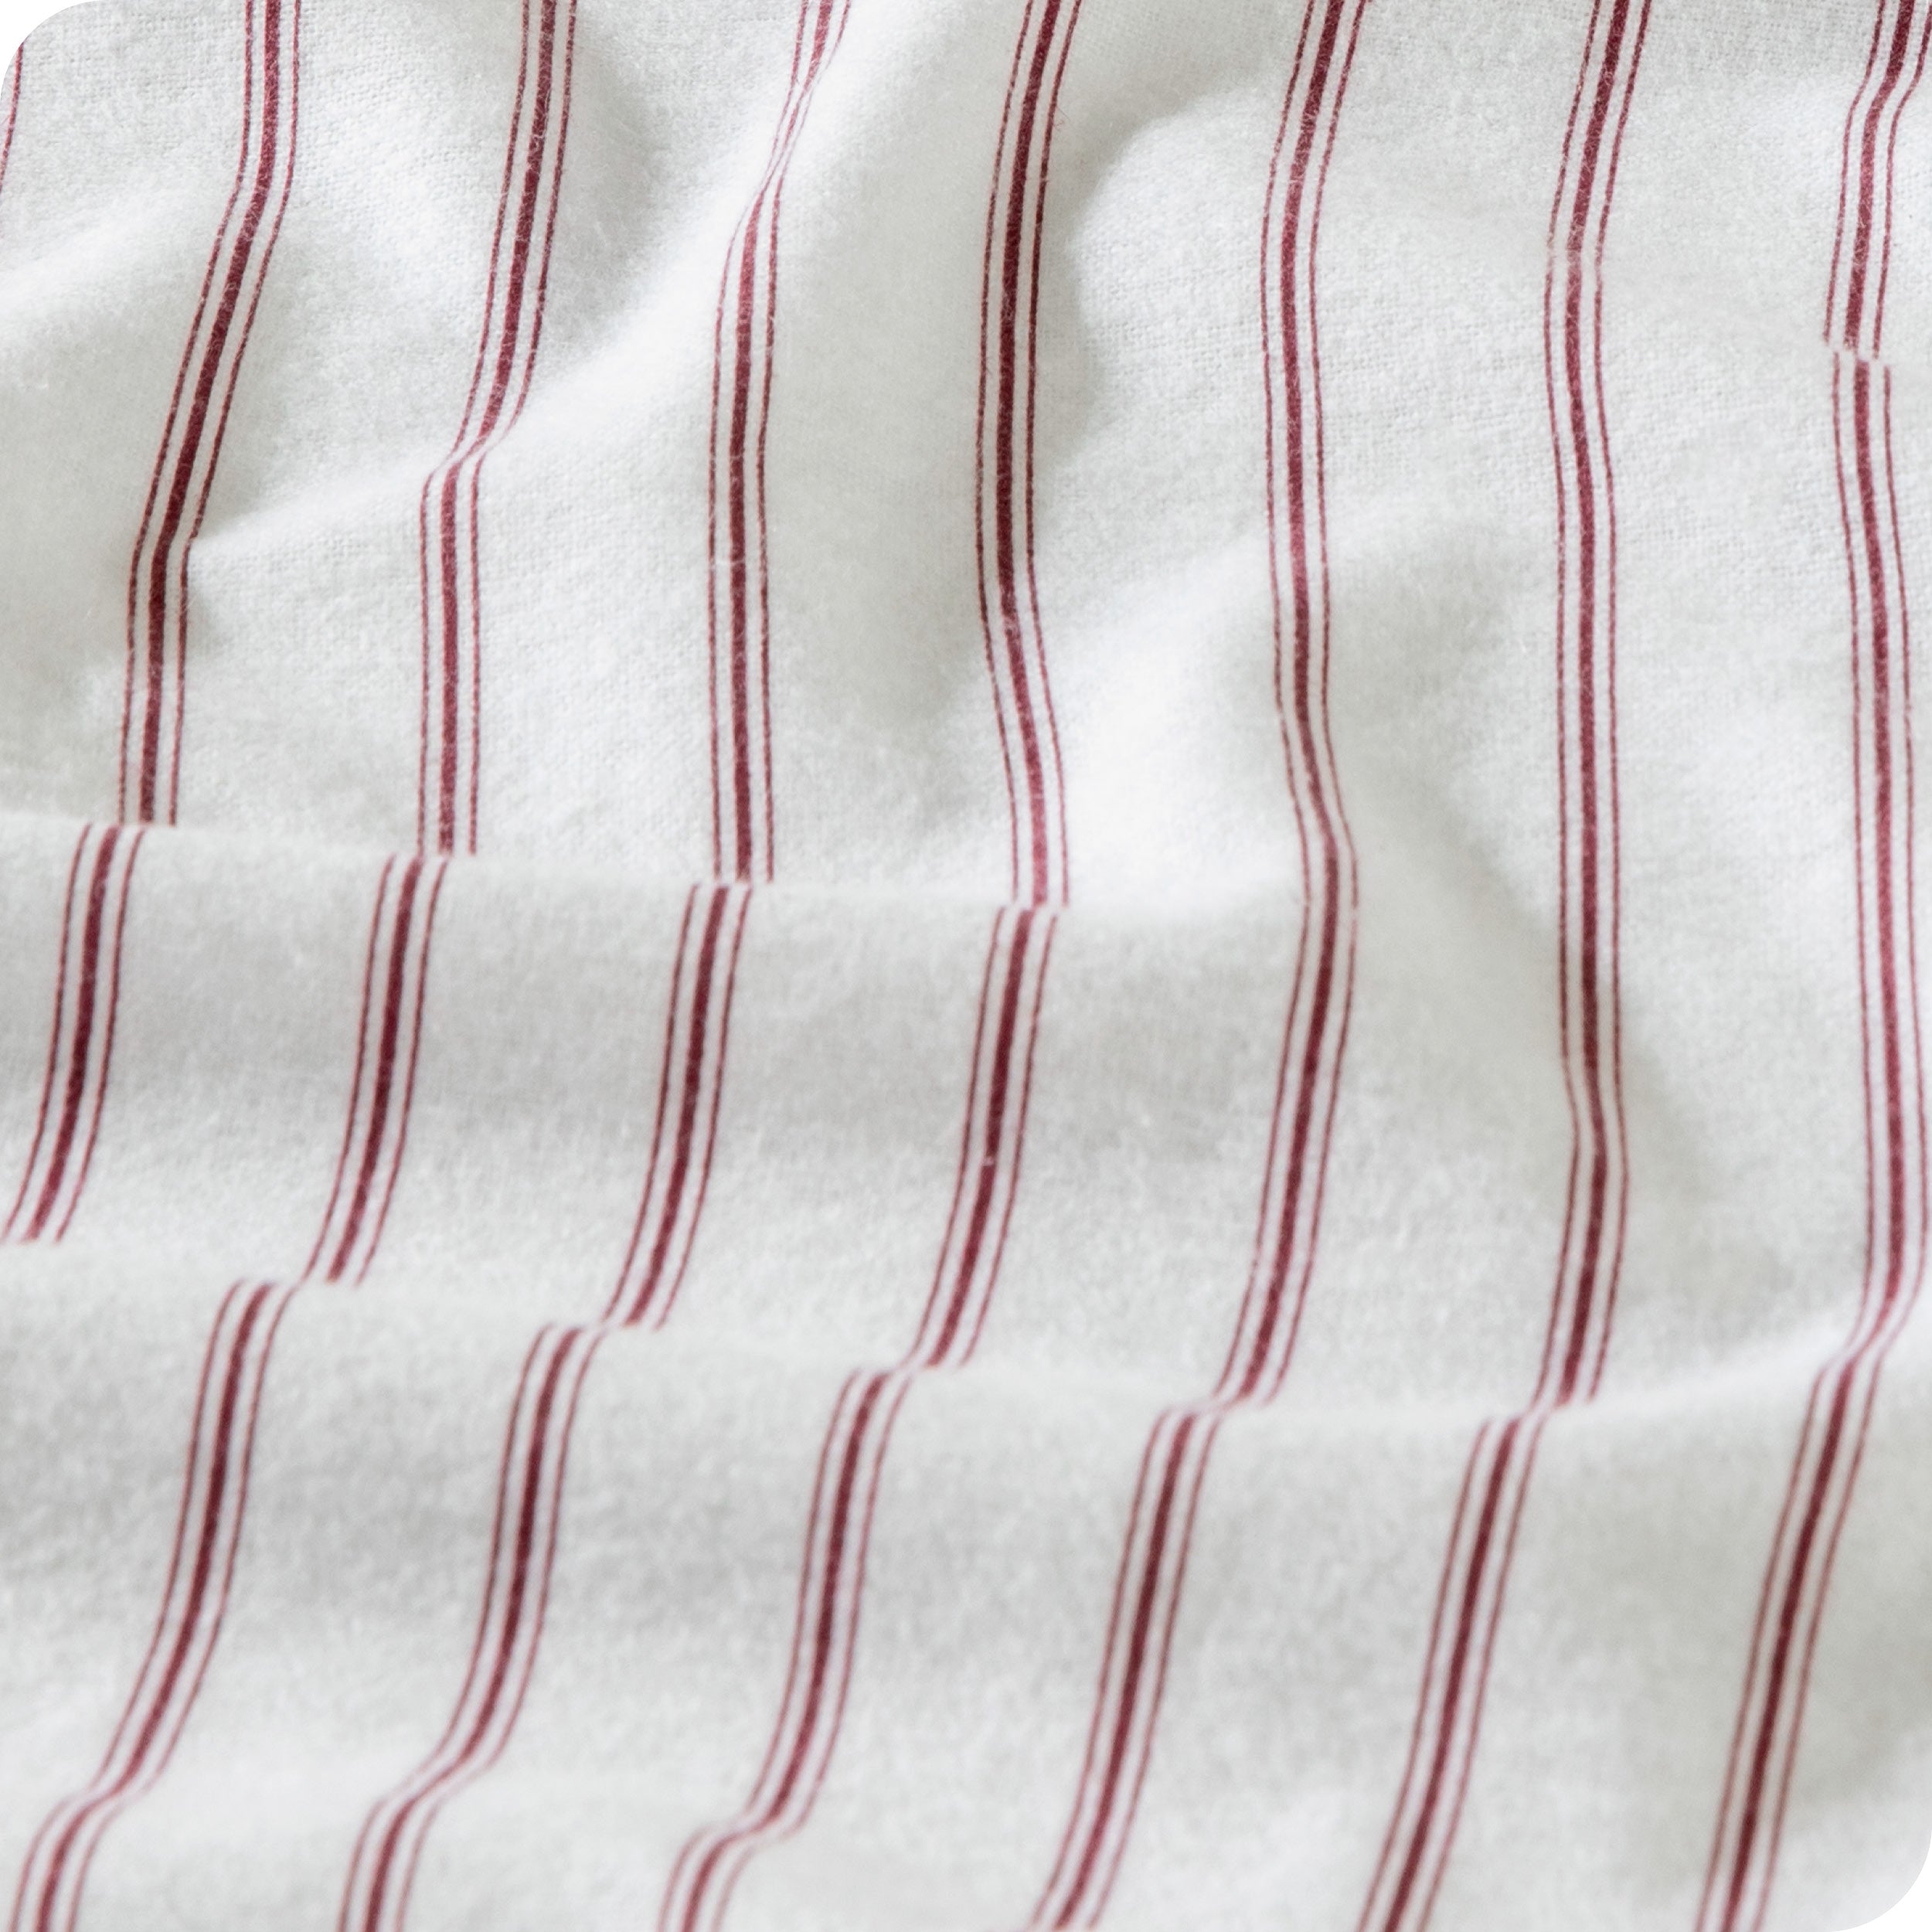 Close up of duvet cover fabric showing the soft texture and print